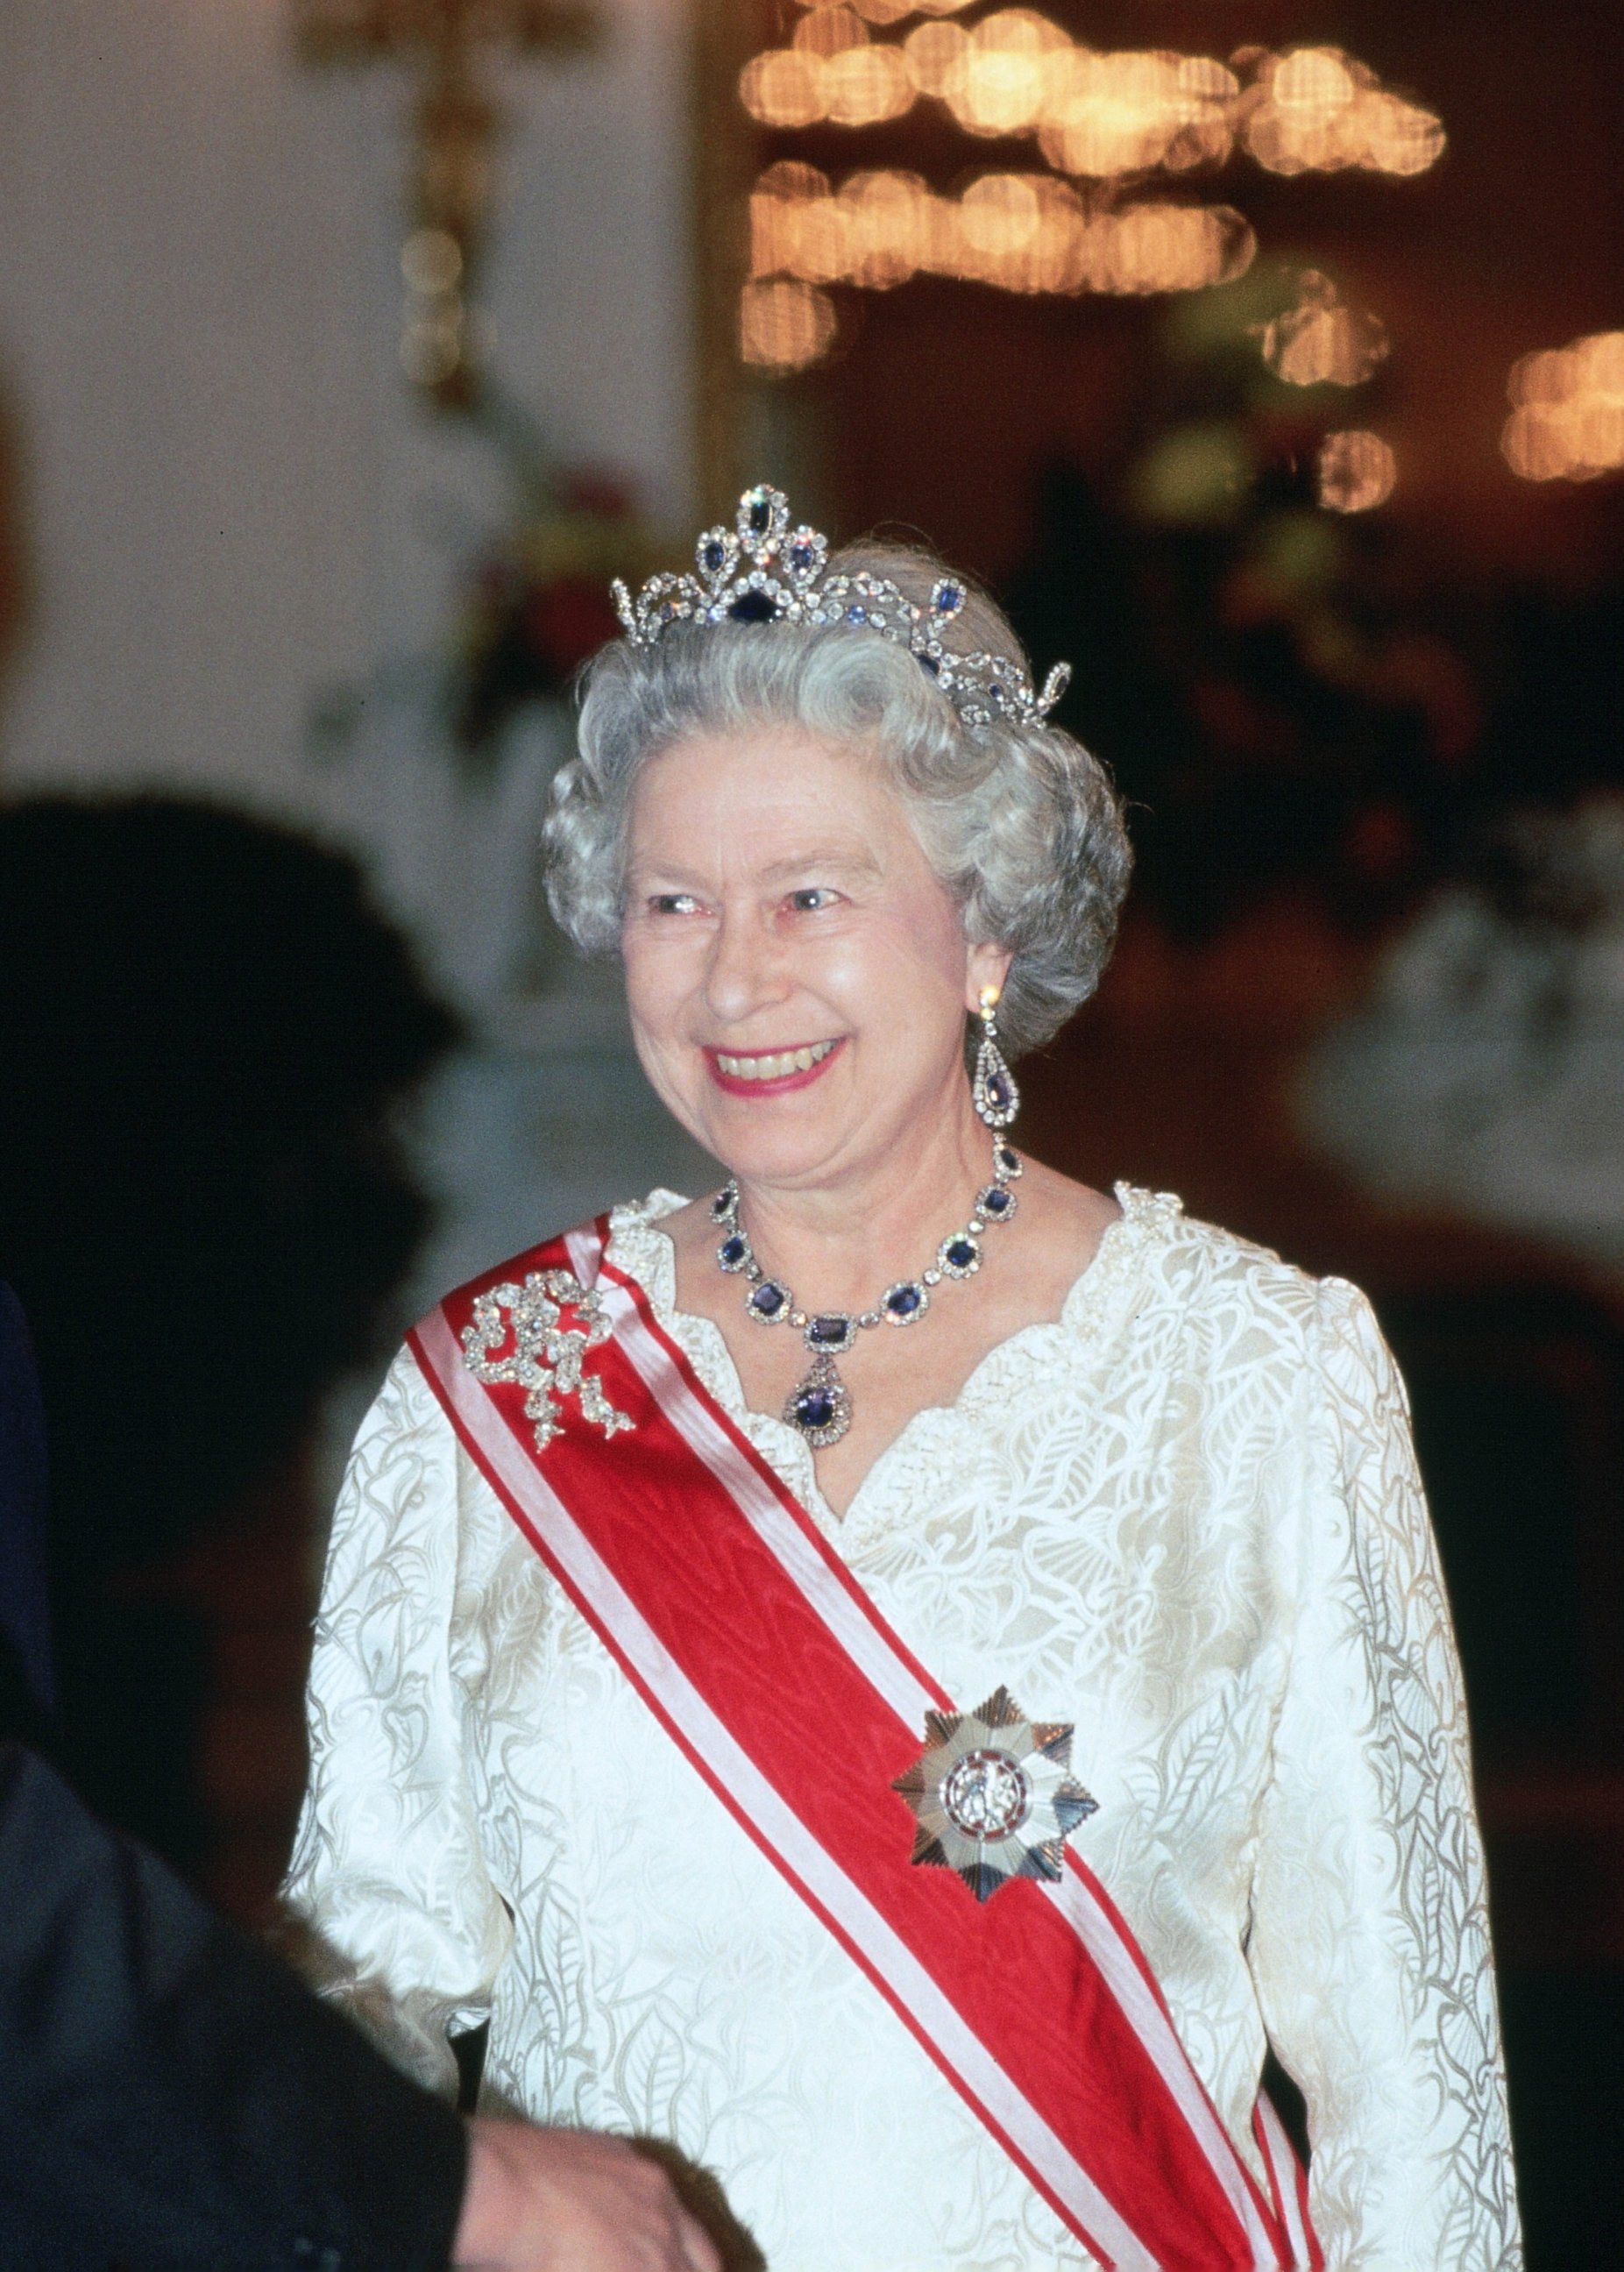 PHOTO: Queen Elizabeth II attends a banquet during a state visit to the Czech Republic on March 27, 1996.